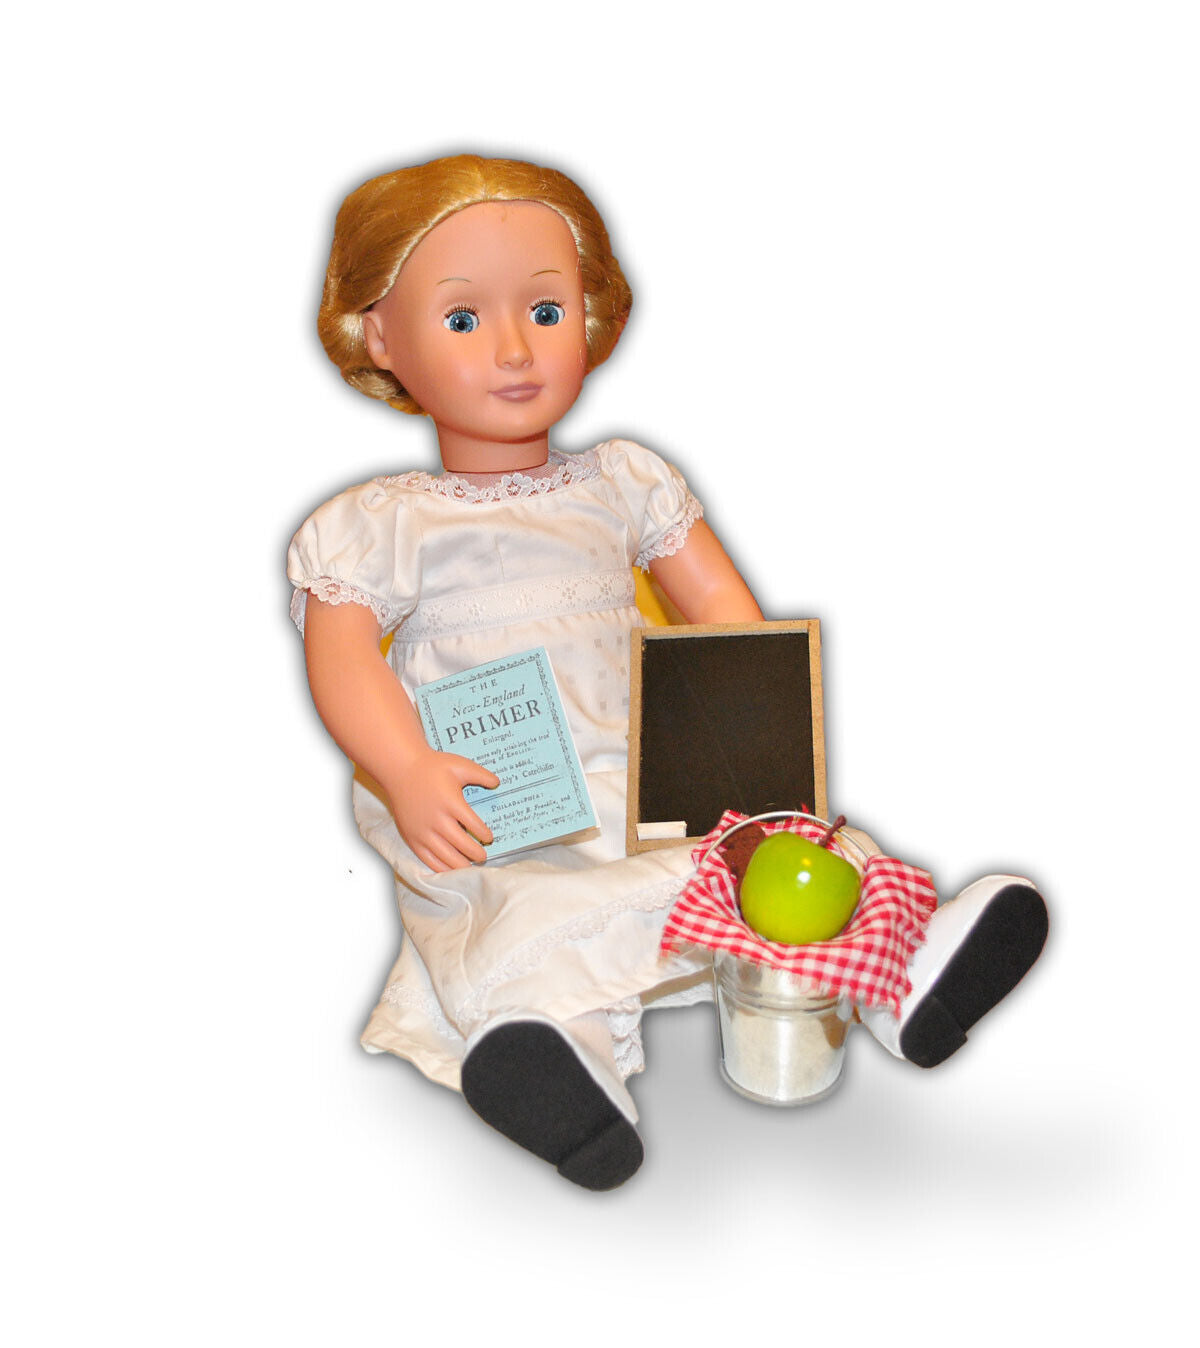 Pioneer School Pain Lunch set for 18" Doll: Primer, Slate, Apple, Cookie, Pail